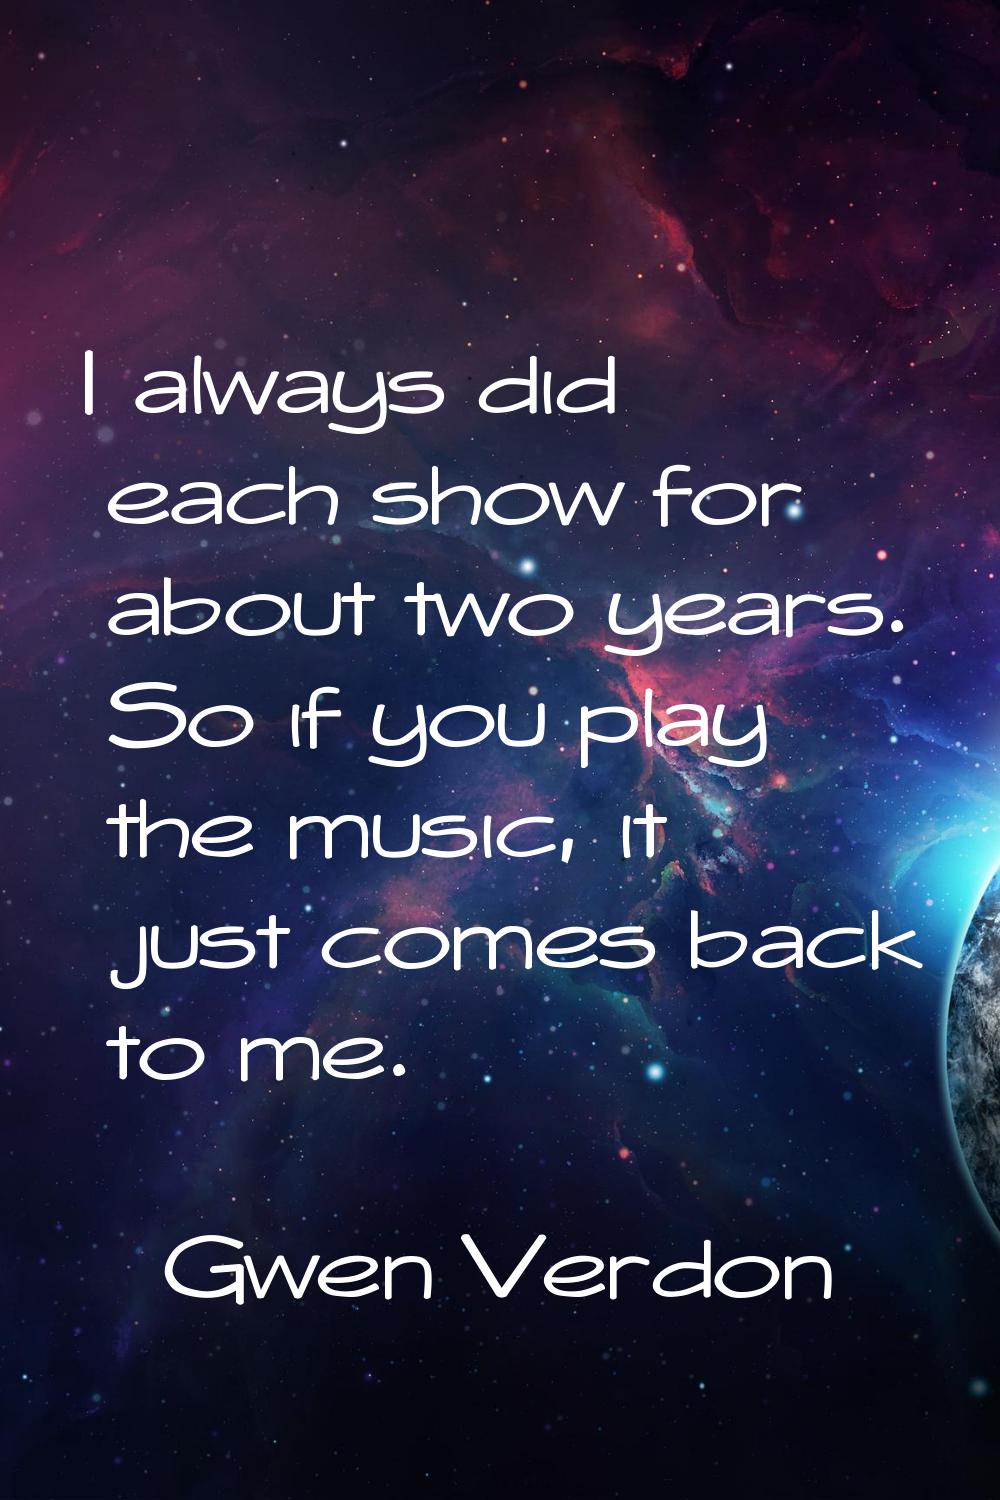 I always did each show for about two years. So if you play the music, it just comes back to me.